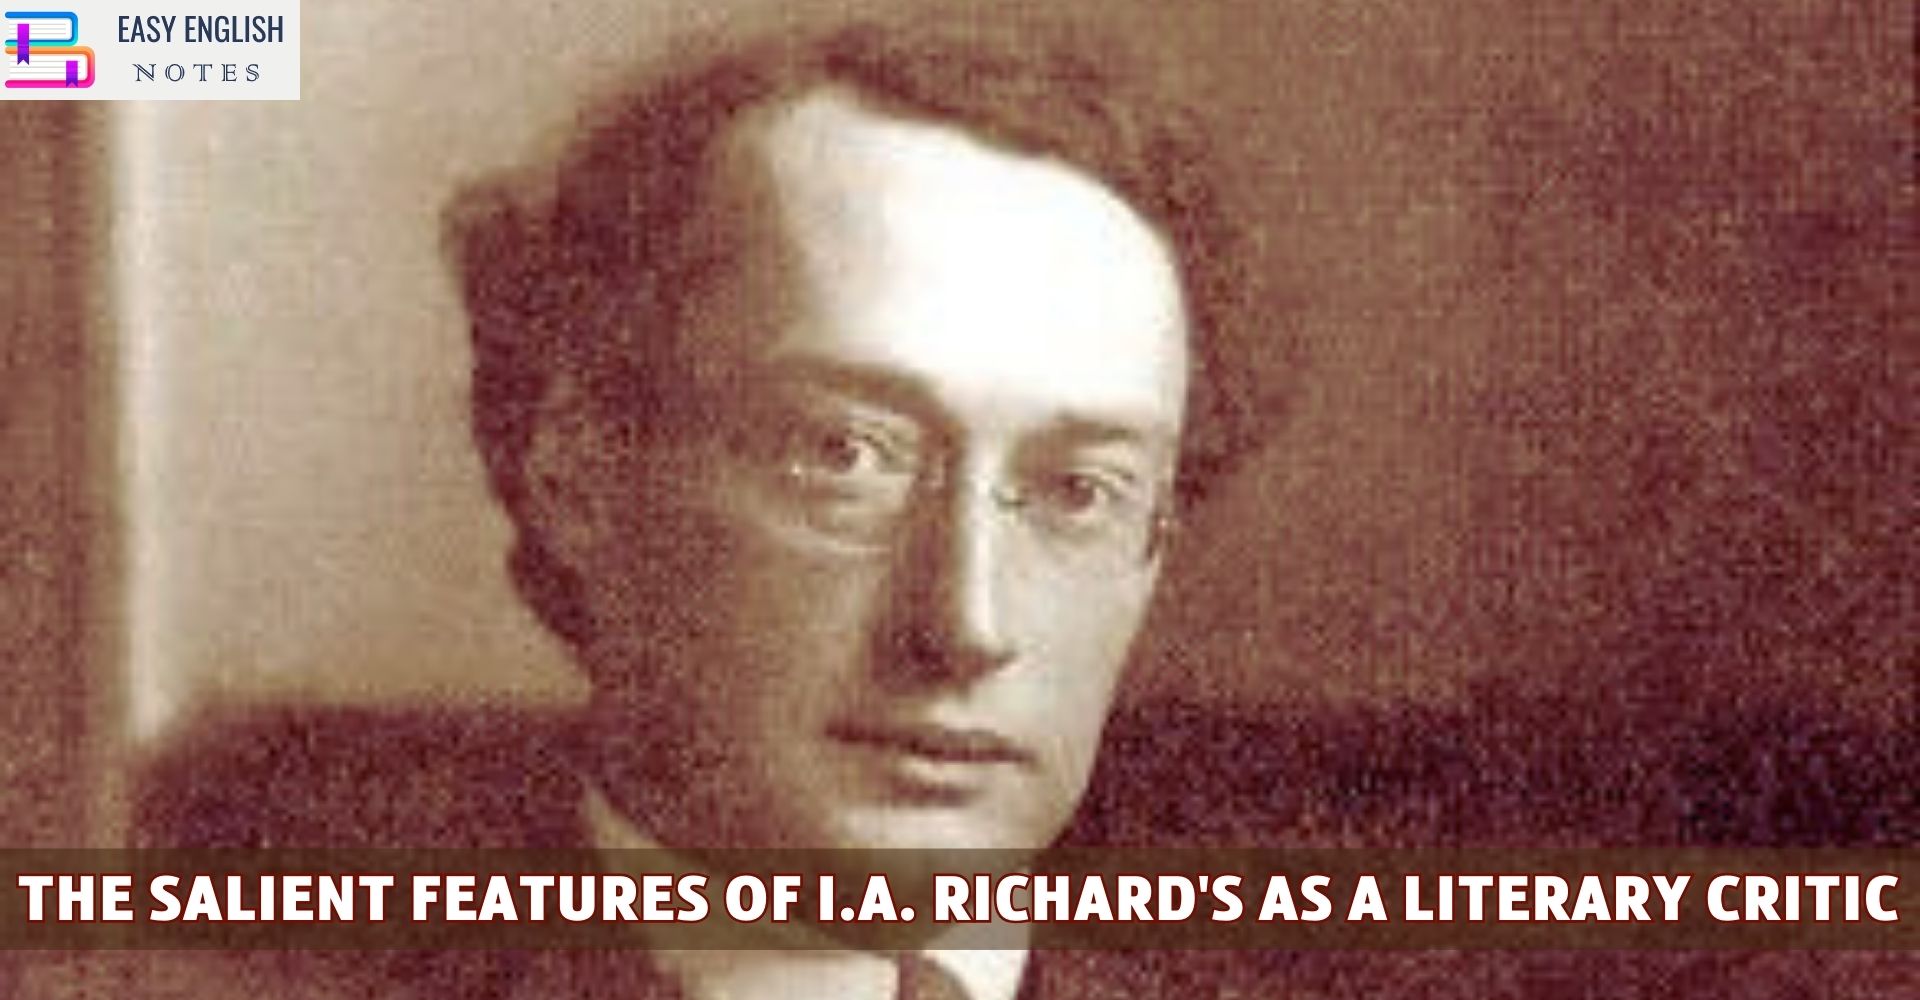 The Salient Features Of I.A. Richard’s as a Literary Critic